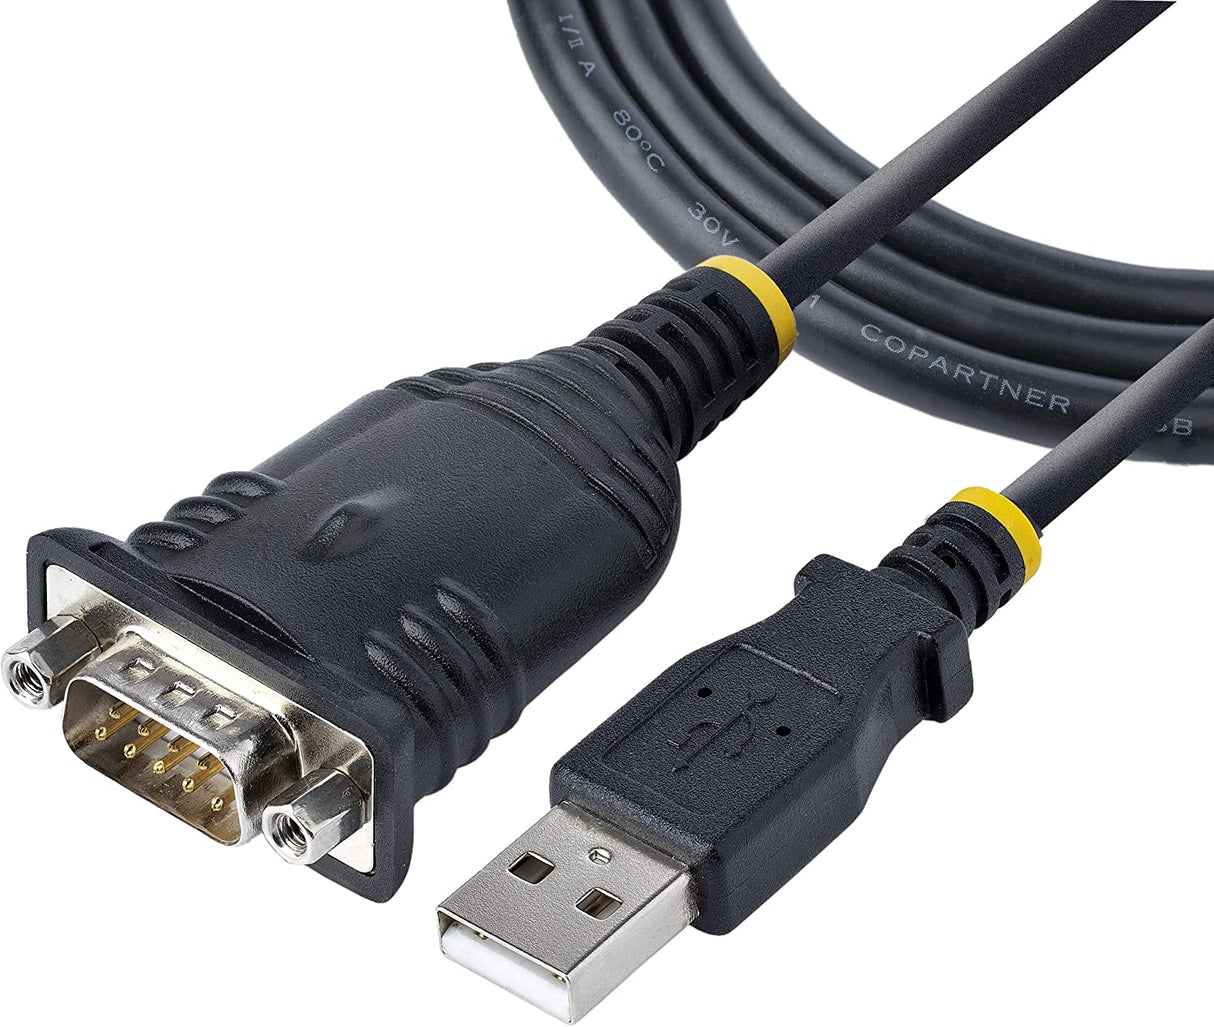 StarTech.com 3ft (1m) USB to Serial Cable, DB9 Male RS232 to USB Converter, Prolific IC, USB to Serial Adapter for PLC/Printer/Scanner/Switch, USB to COM Port Adapter, Windows/Mac (1P3FP-USB-SERIAL)